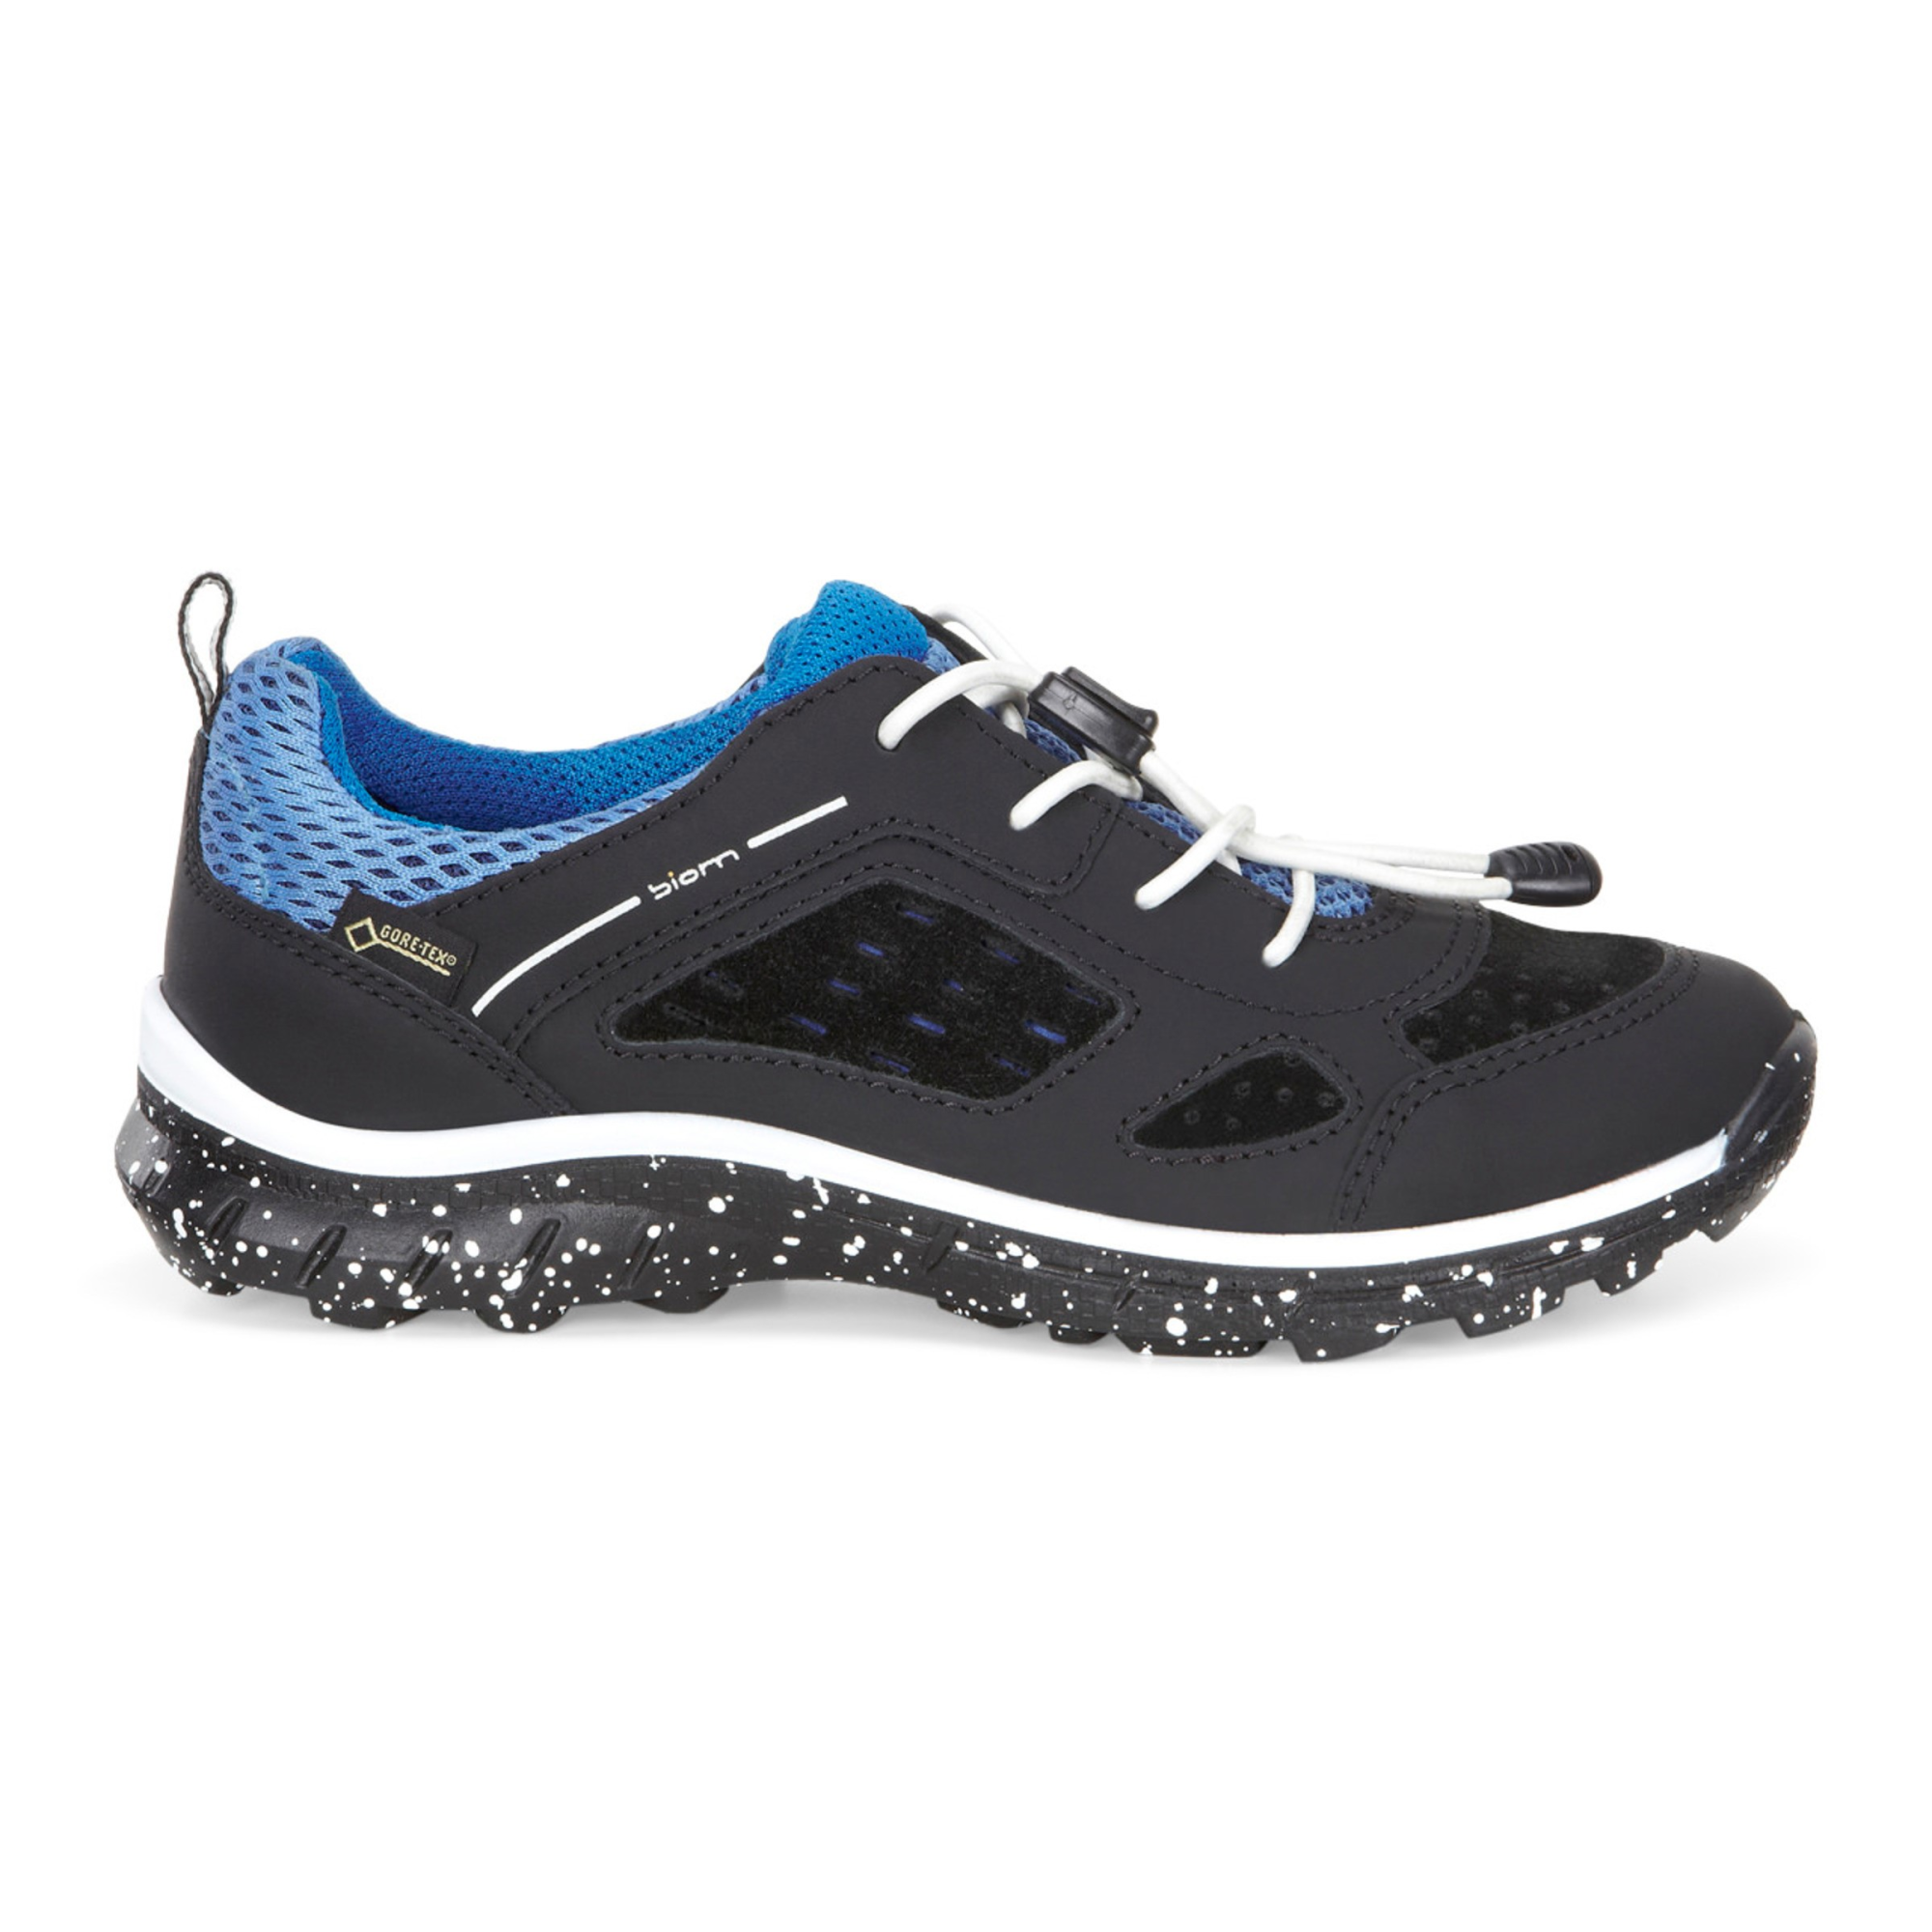 Ecco Trail Kids GTX 29 - Products - Veryk - Veryk Mall, many product, quick response, safe your money!